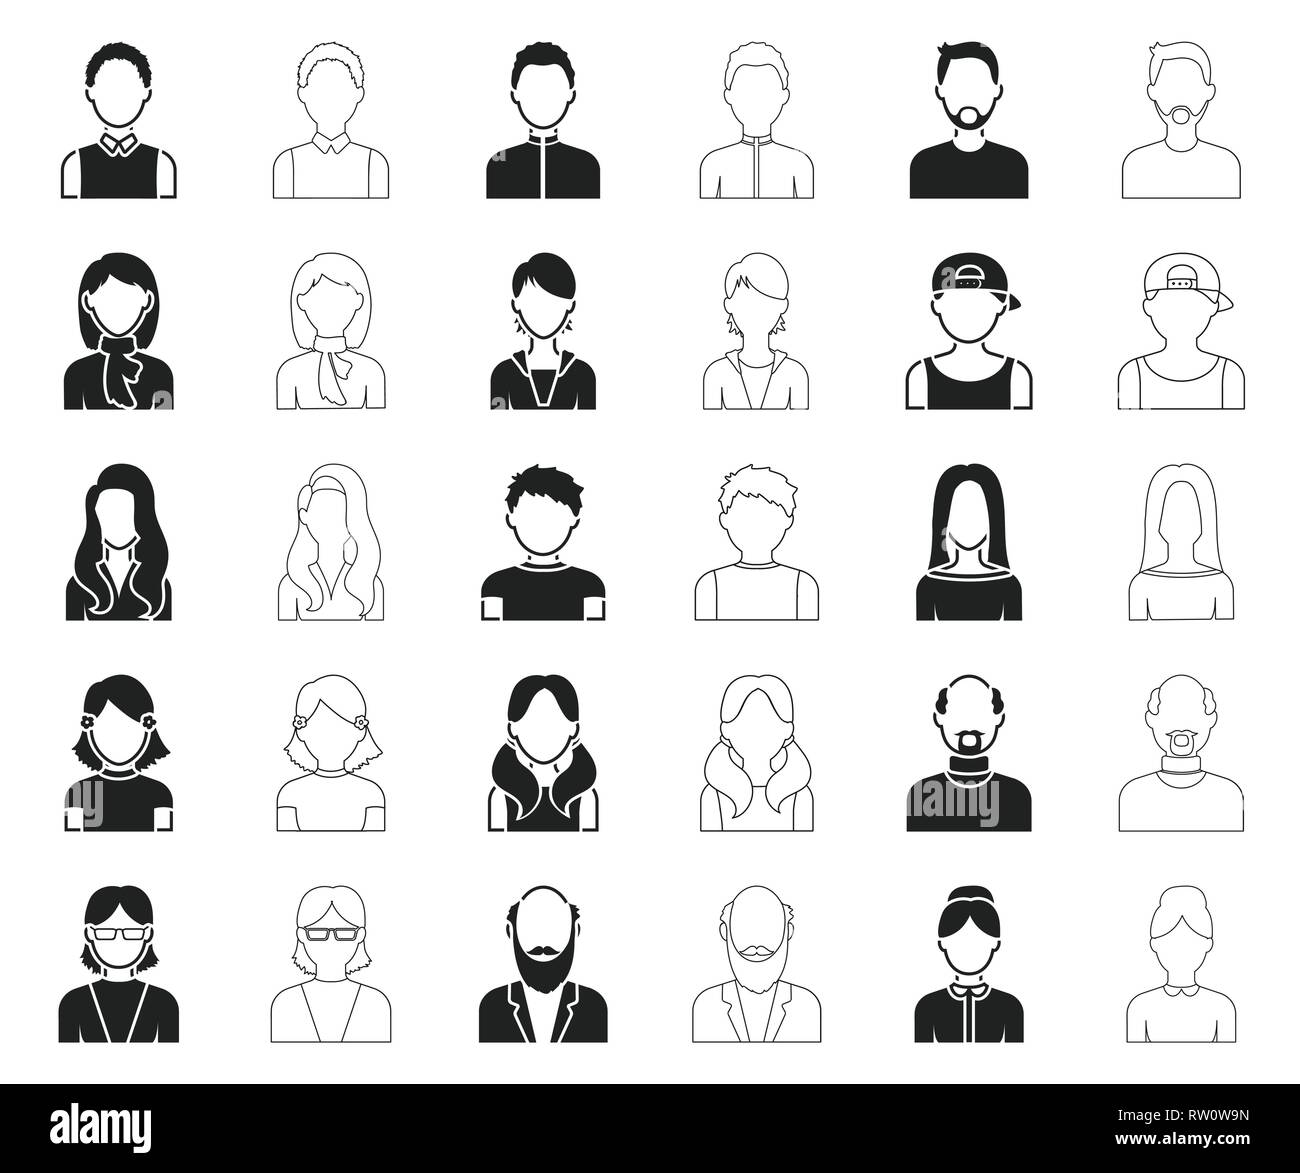 appearance,art,athlete,avatar,bald,beard,black,outline,boy,collection,design,dress,face,facial expression,fashion,girl,glasses,grandfather,grandmother,hairstyle,head,human,icon,illustration,isolated,logo,man,mustache,outside,people,person,portrait,set,sign,stepfather,stepmother,style,symbol,teacher,tie,user,vector,web,woman,working Vector Vectors , Stock Vector